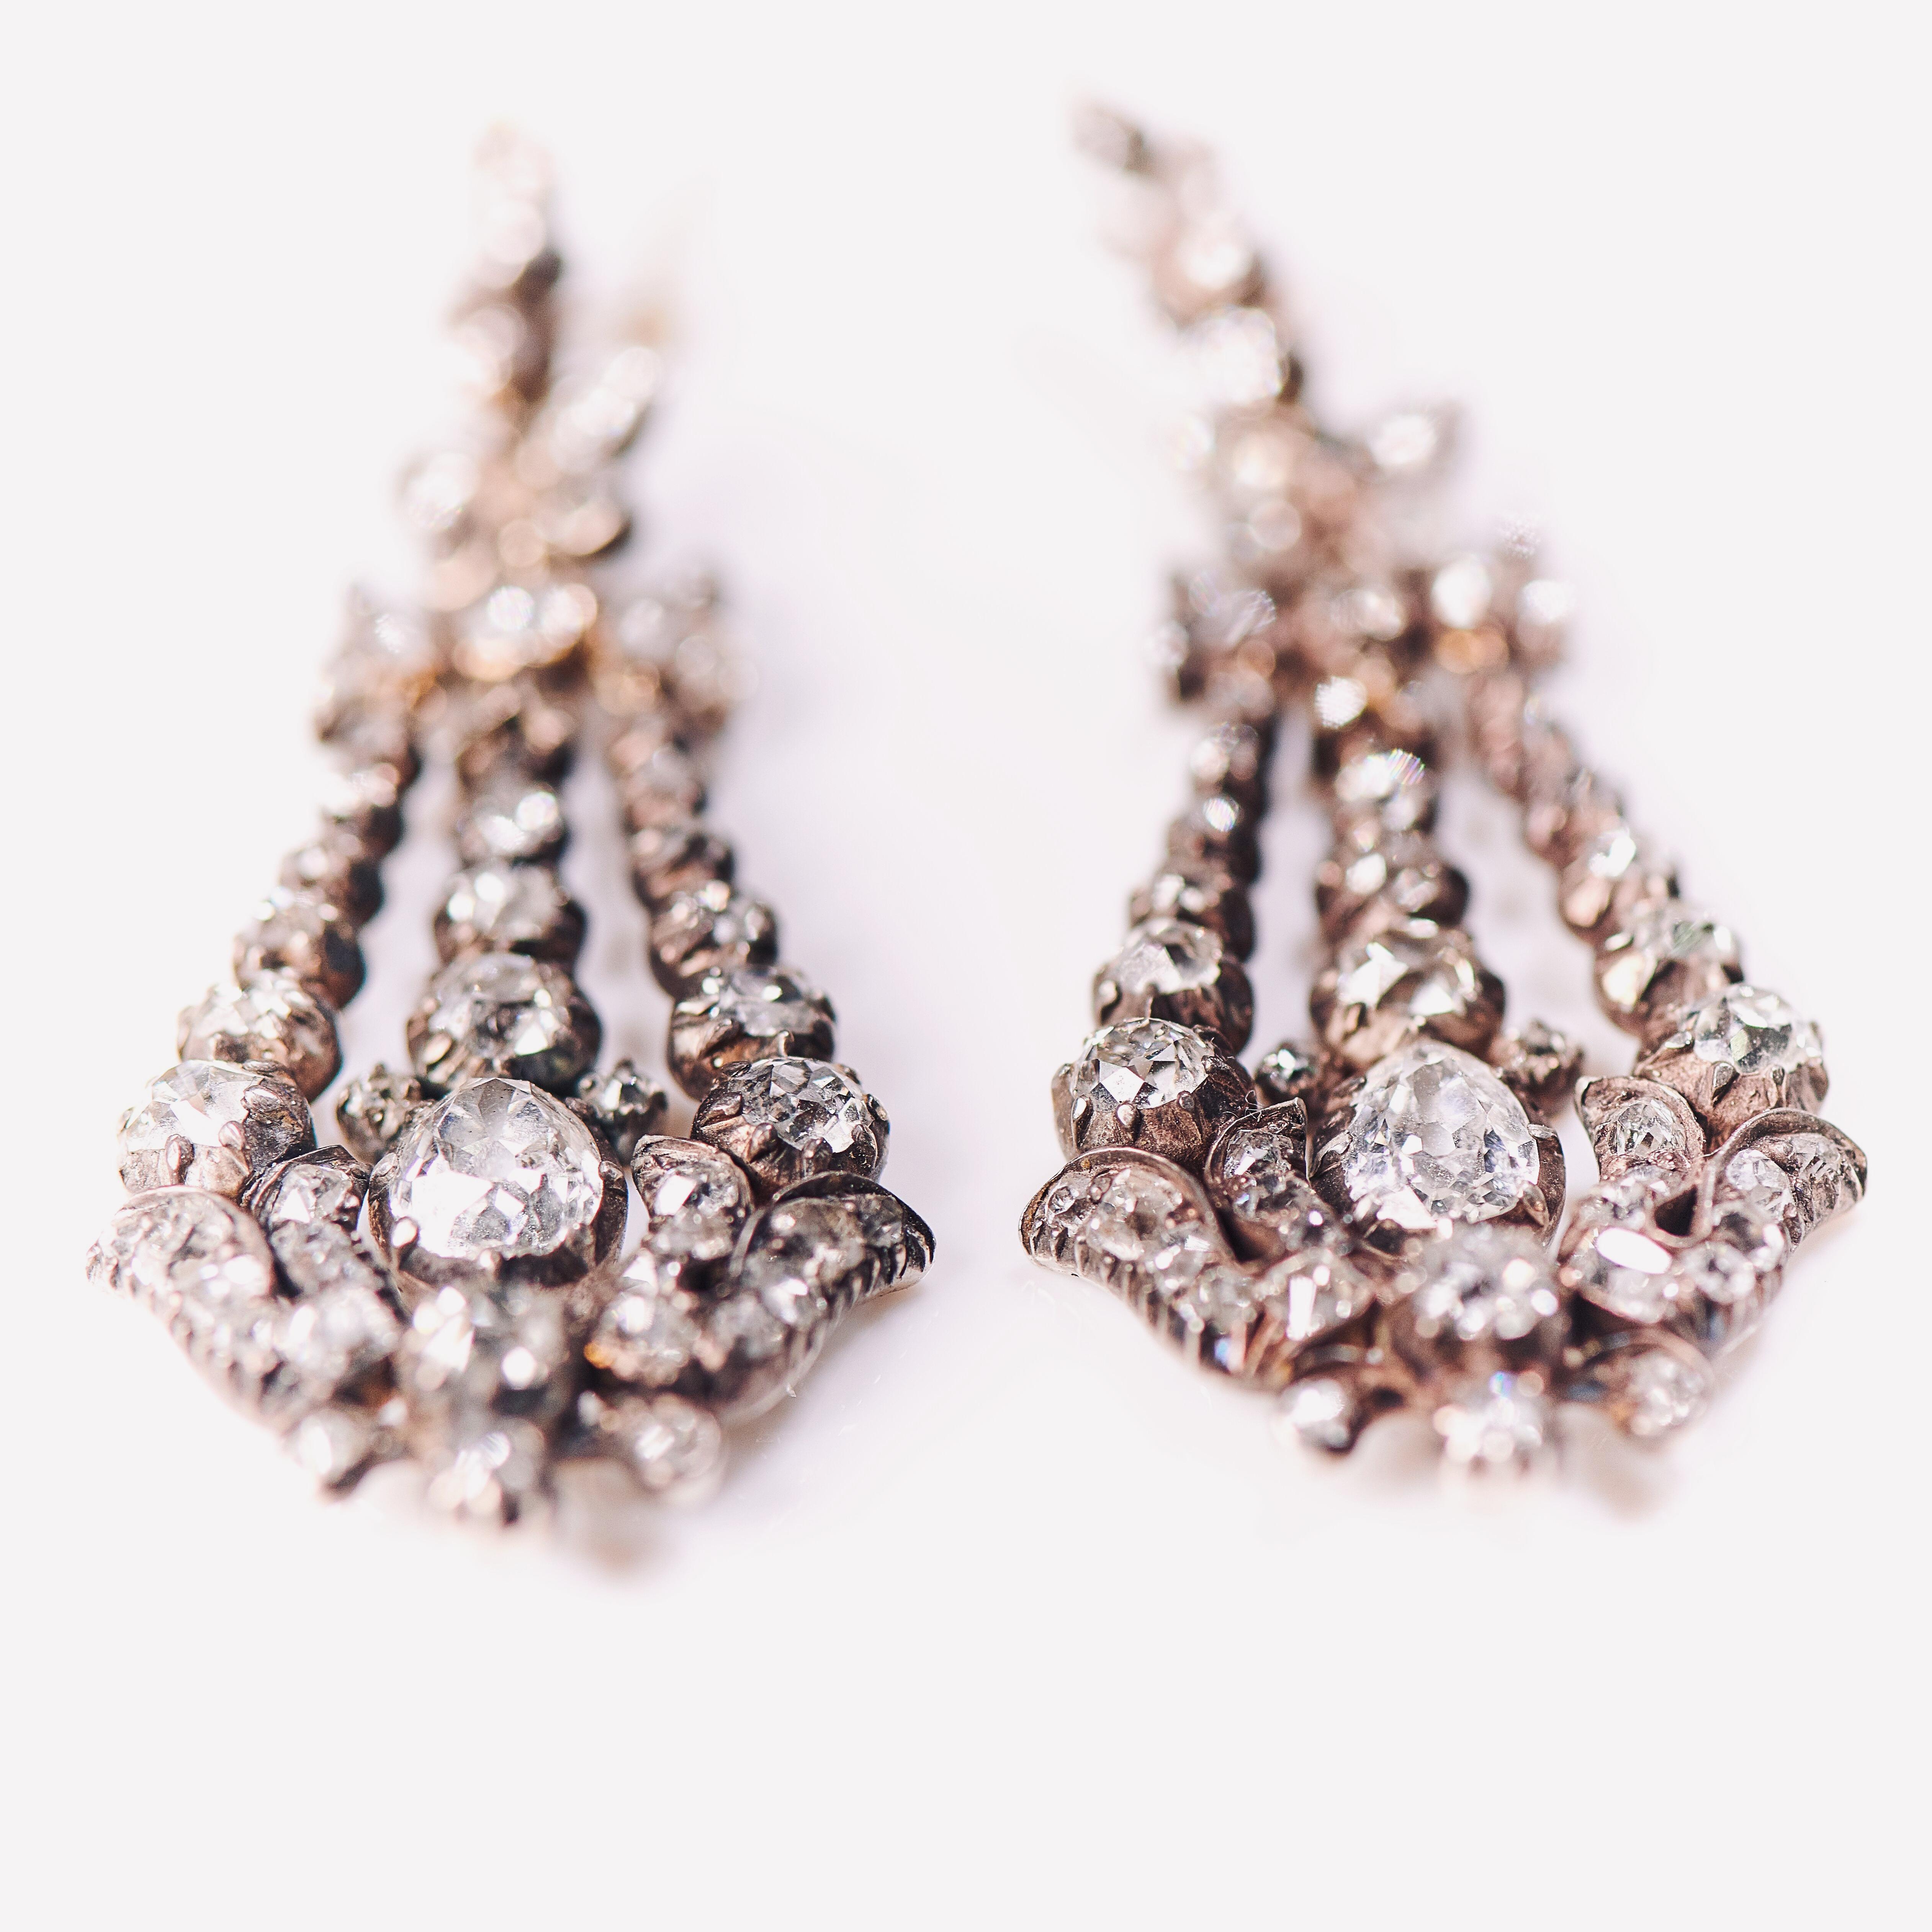 Victorian, 18ct Yellow gold, silver diamond drop earrings, circa 1840. An extremely beautiful pair of 19th century diamond earrings set with old mine cut diamonds. 

These earrings are exquisite, incredibly well made and very wearable. They look